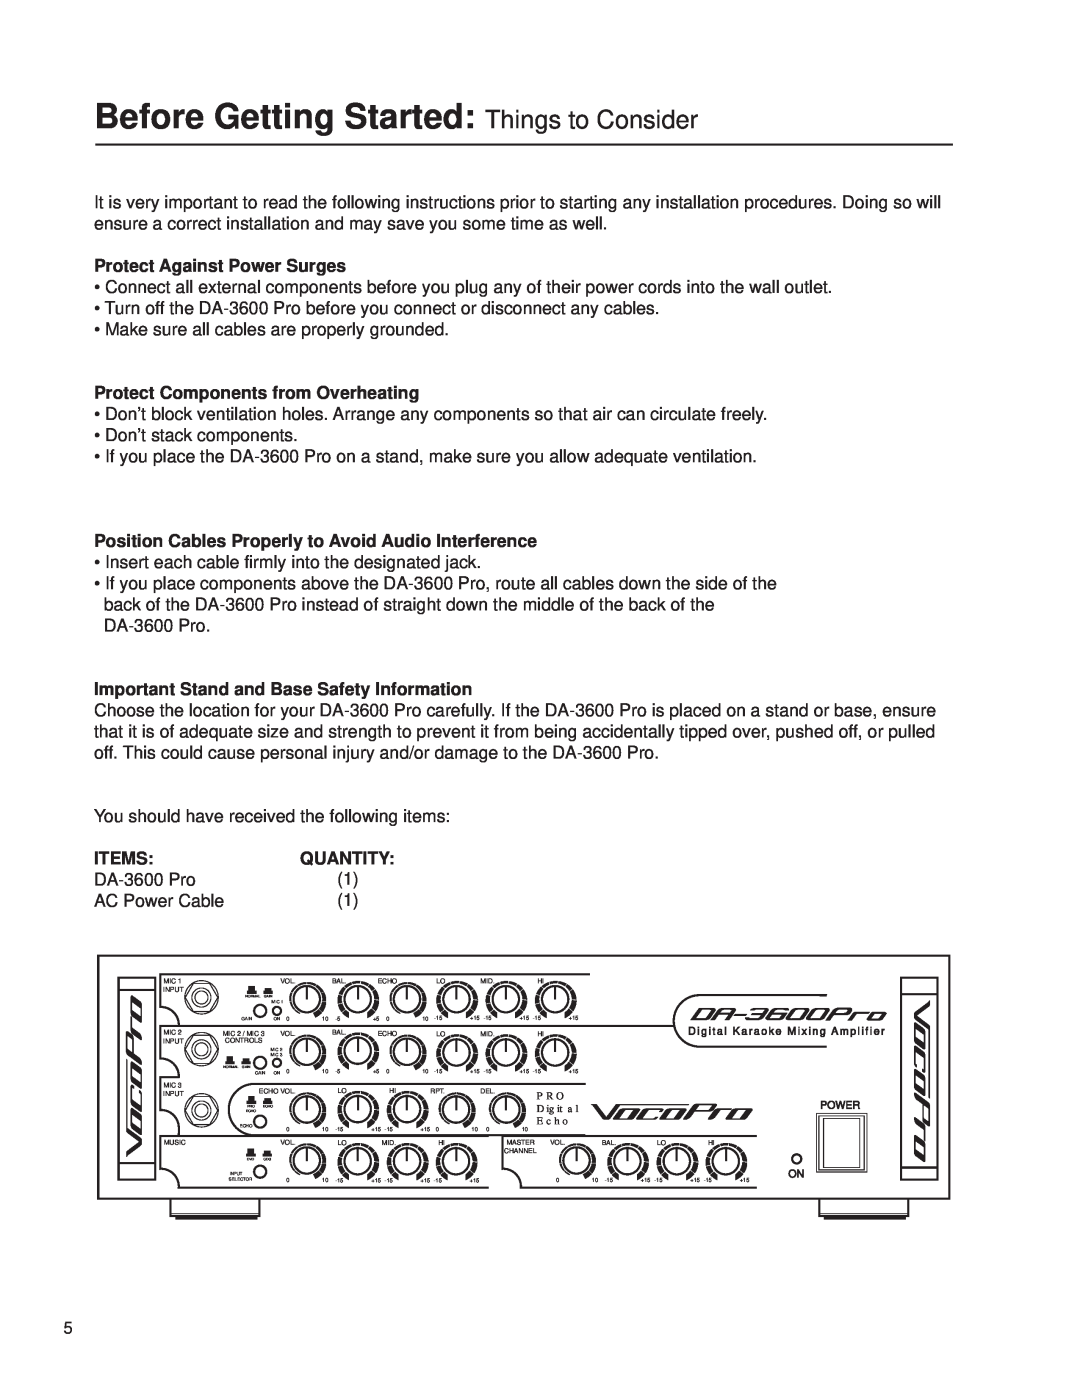 VocoPro DA-3600Pro2 owner manual Before Getting Started Things to Consider, Protect Against Power Surges, Items, Quantity 